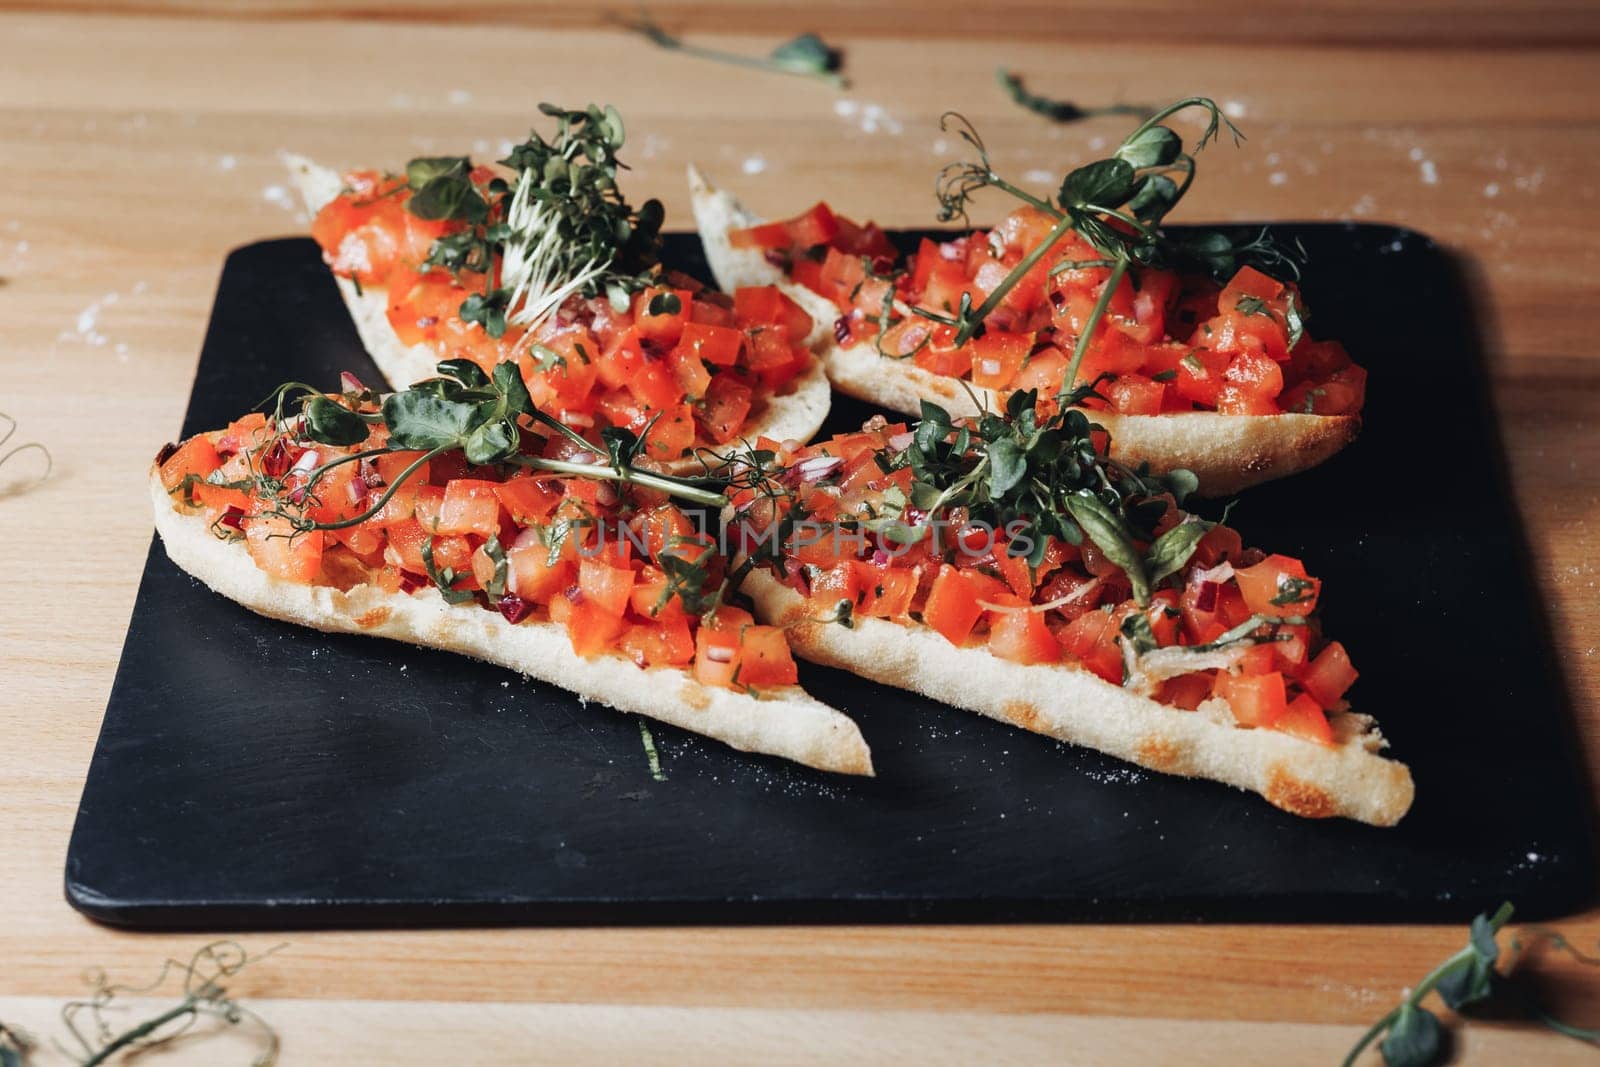 A plate brimming with freshly made bruschetta topped with juicy tomatoes and fragrant herbs, enticing the viewer with its vibrant colors and savory aroma.